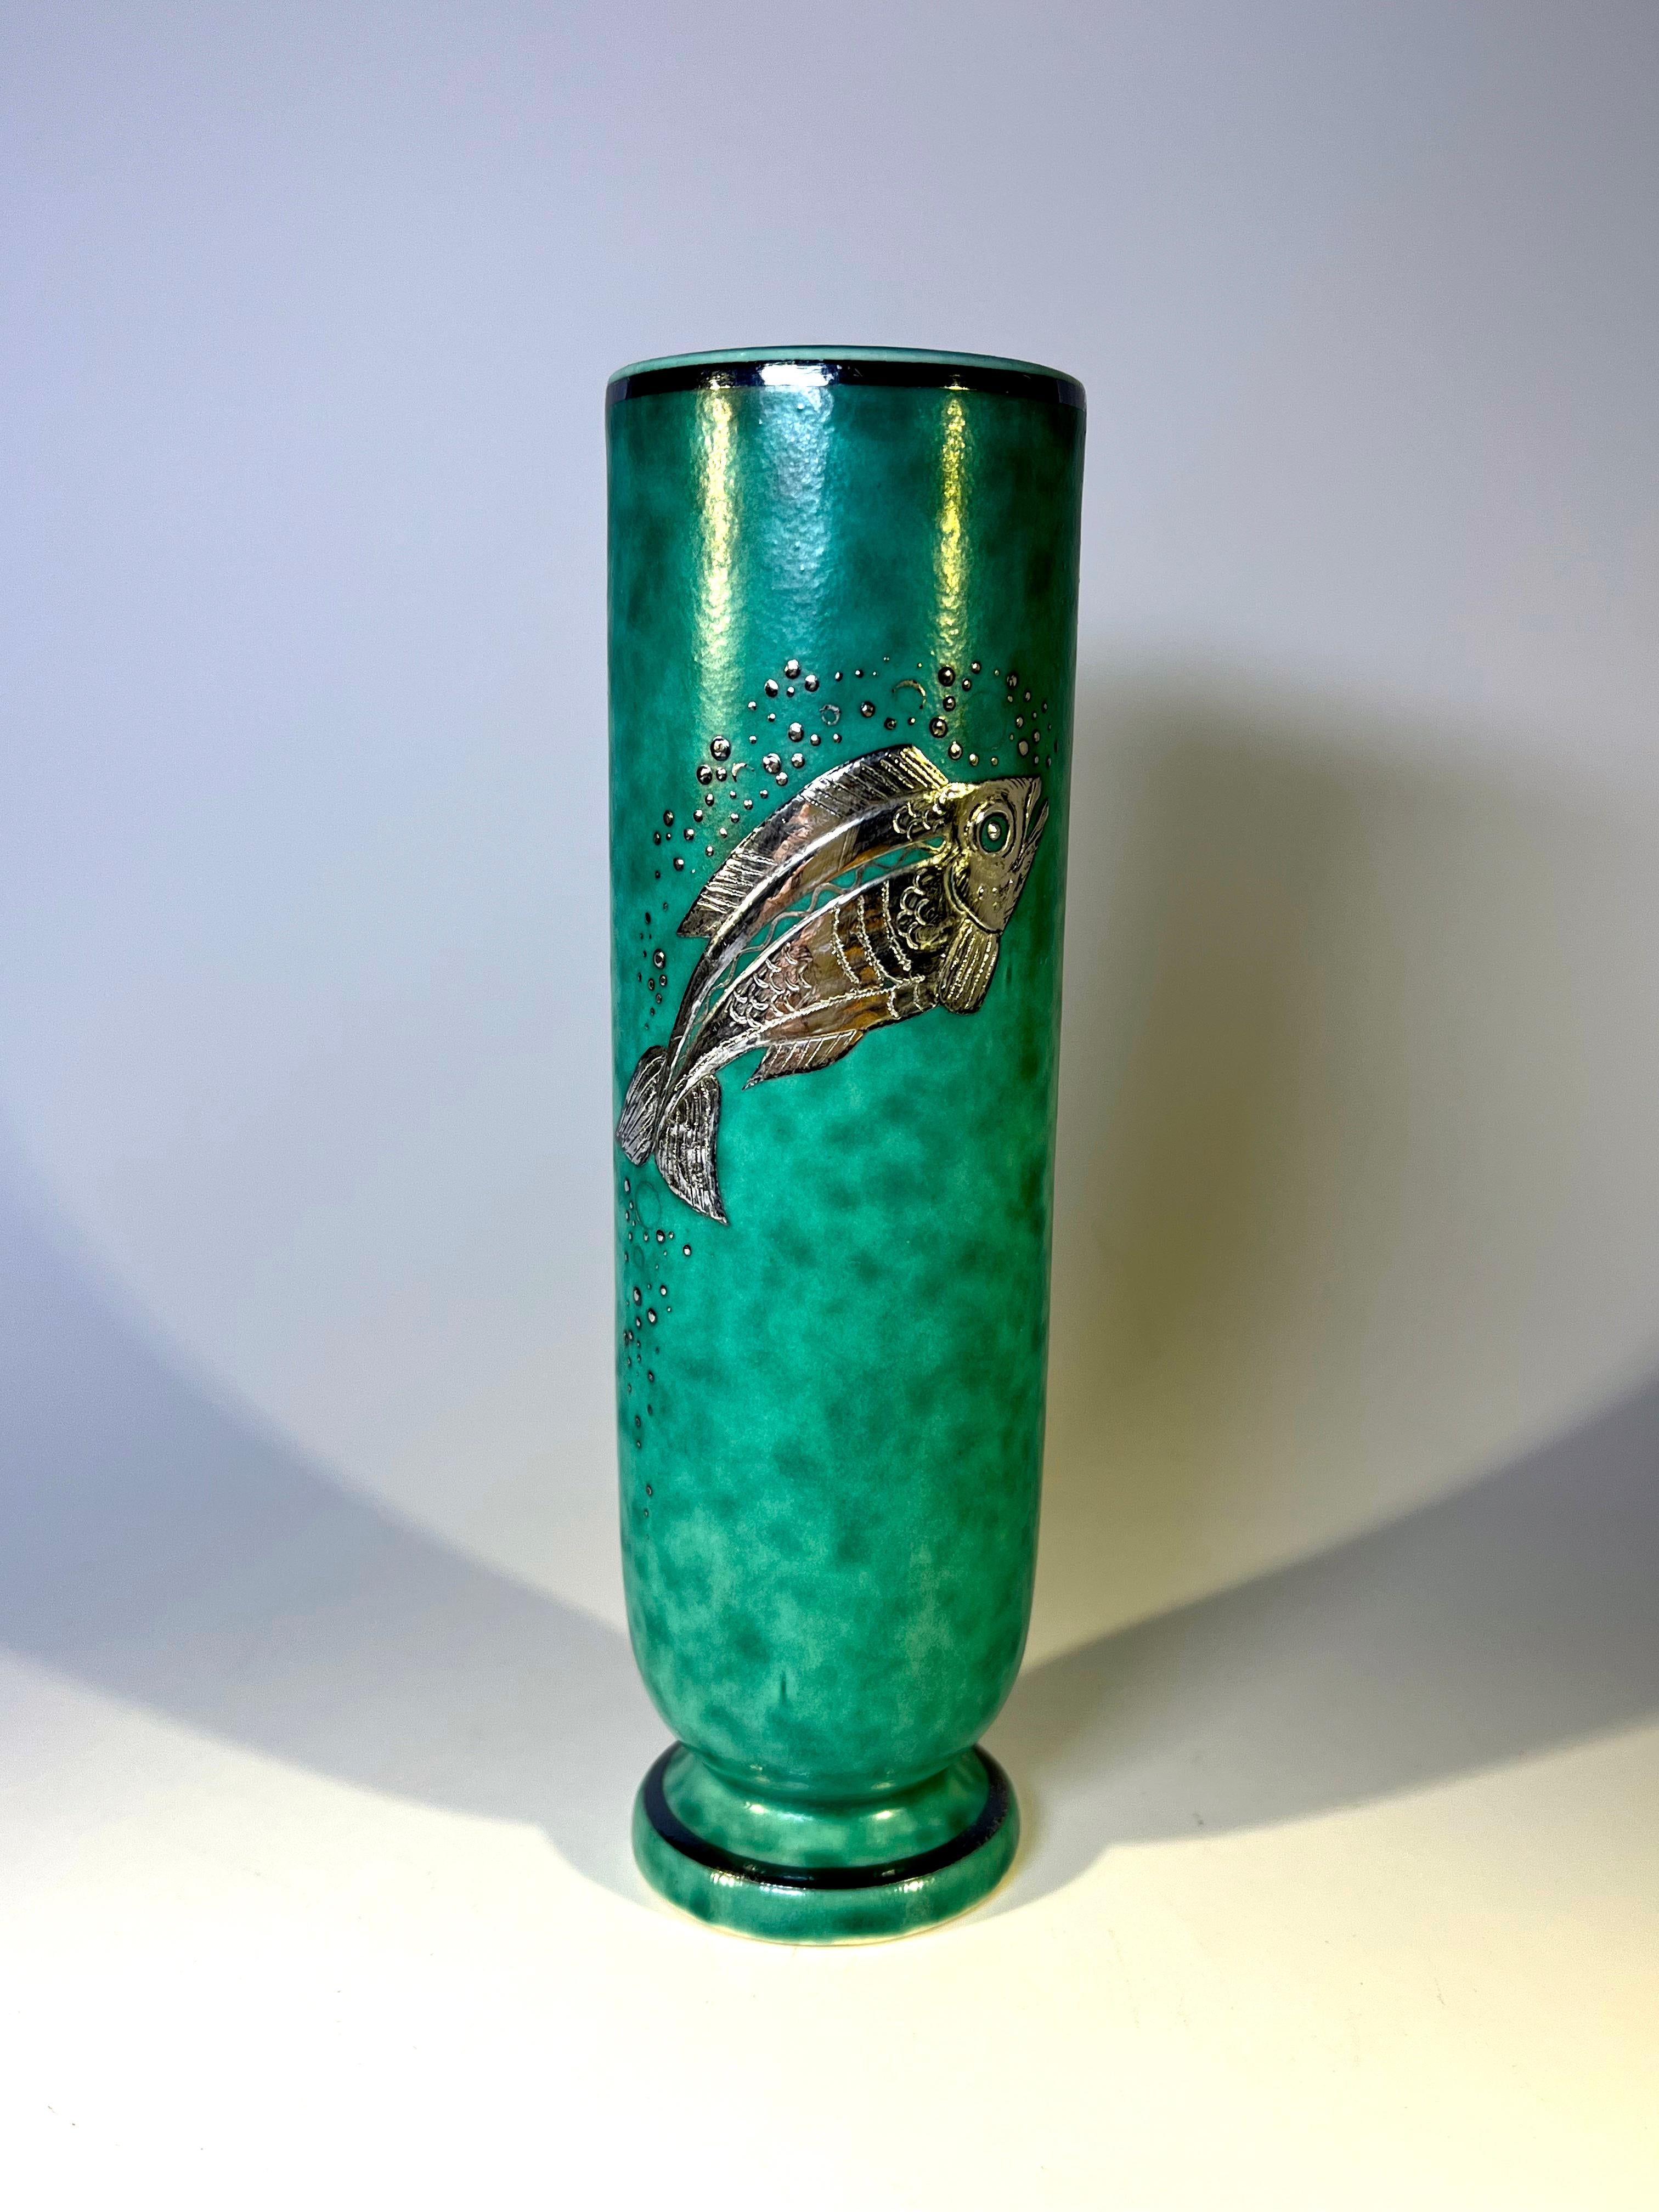 Superb bijou vase by Wilhelm Kage for Gustavsberg, Sweden from the Argenta collection.
Decorated with a stylised fish of applied silver on mottled green stoneware.
Circa 1930's
Base marked in silver paste, Gustavsberg Argenta 1029 II Made in